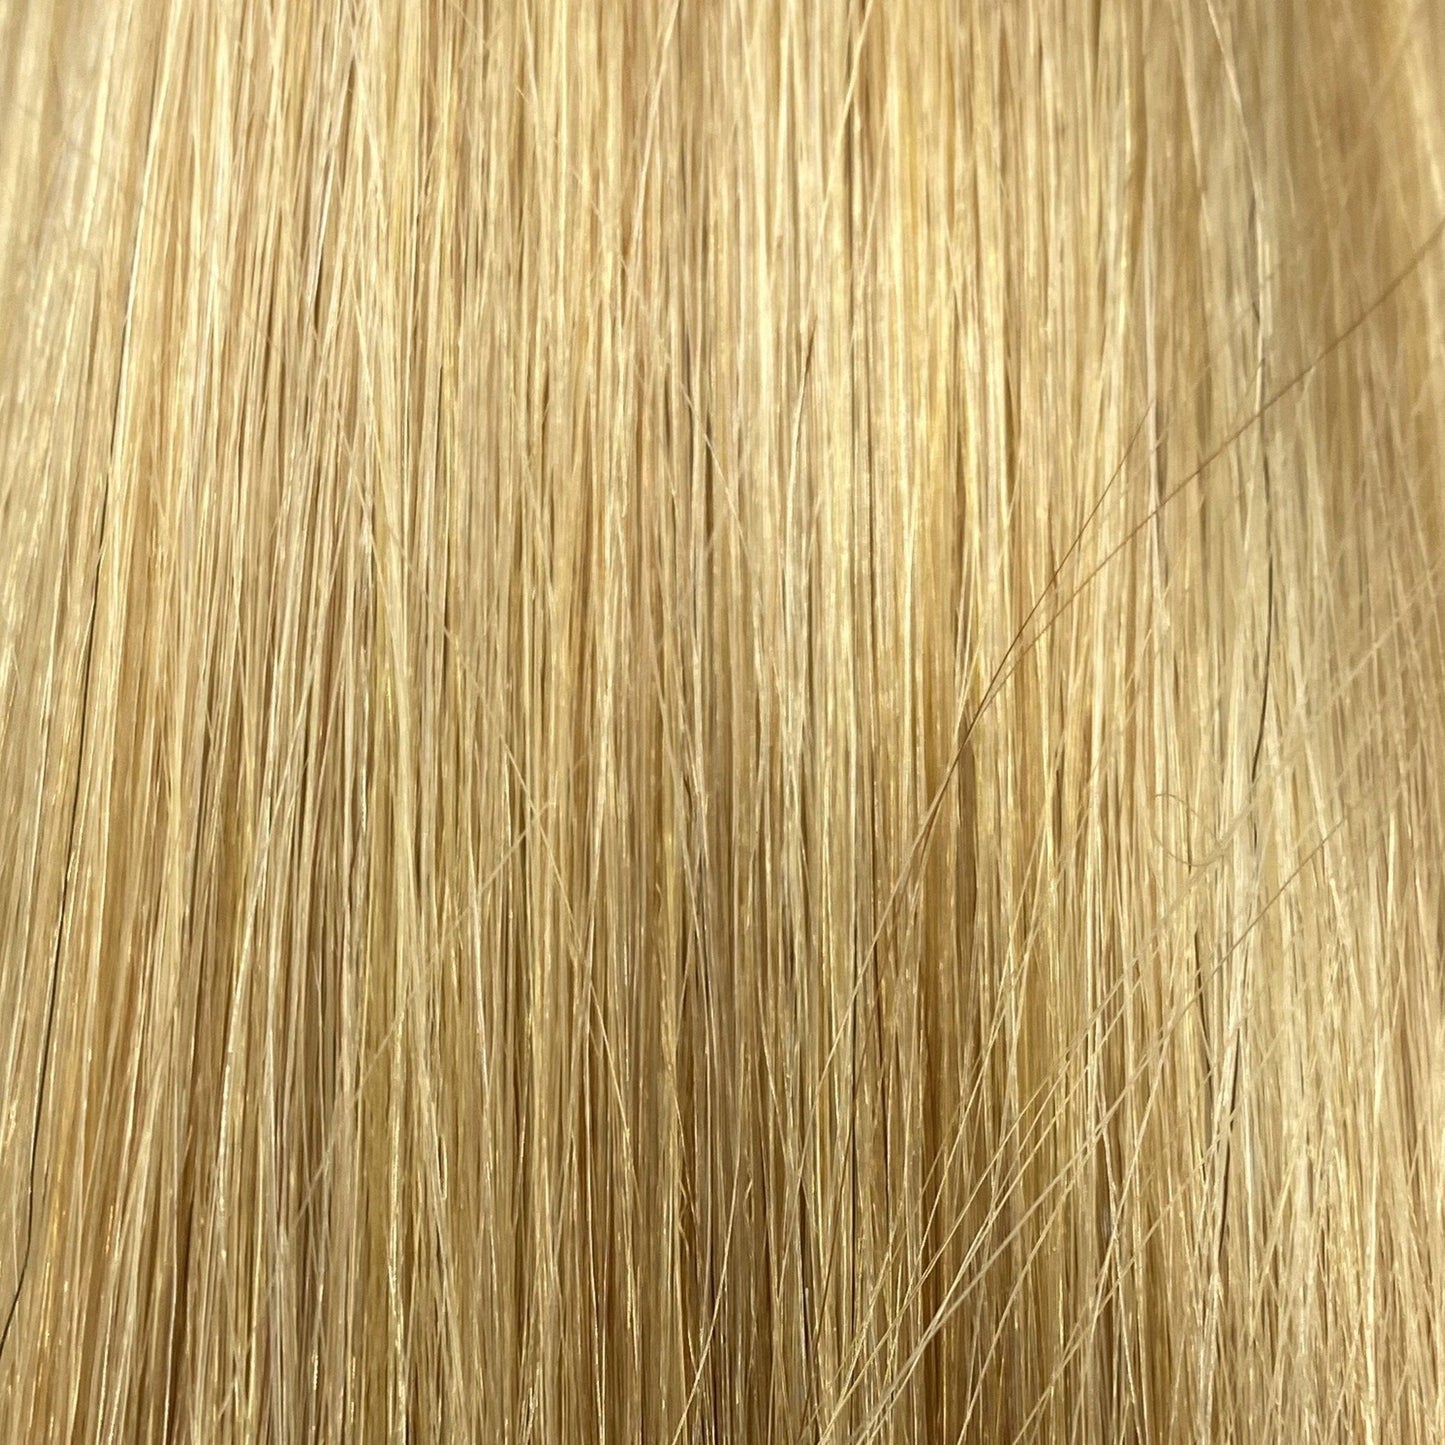 Fusion hair extensions #140 - 50cm/20 inches - Golden Ultra Blonde Fusion Euro So Cap 